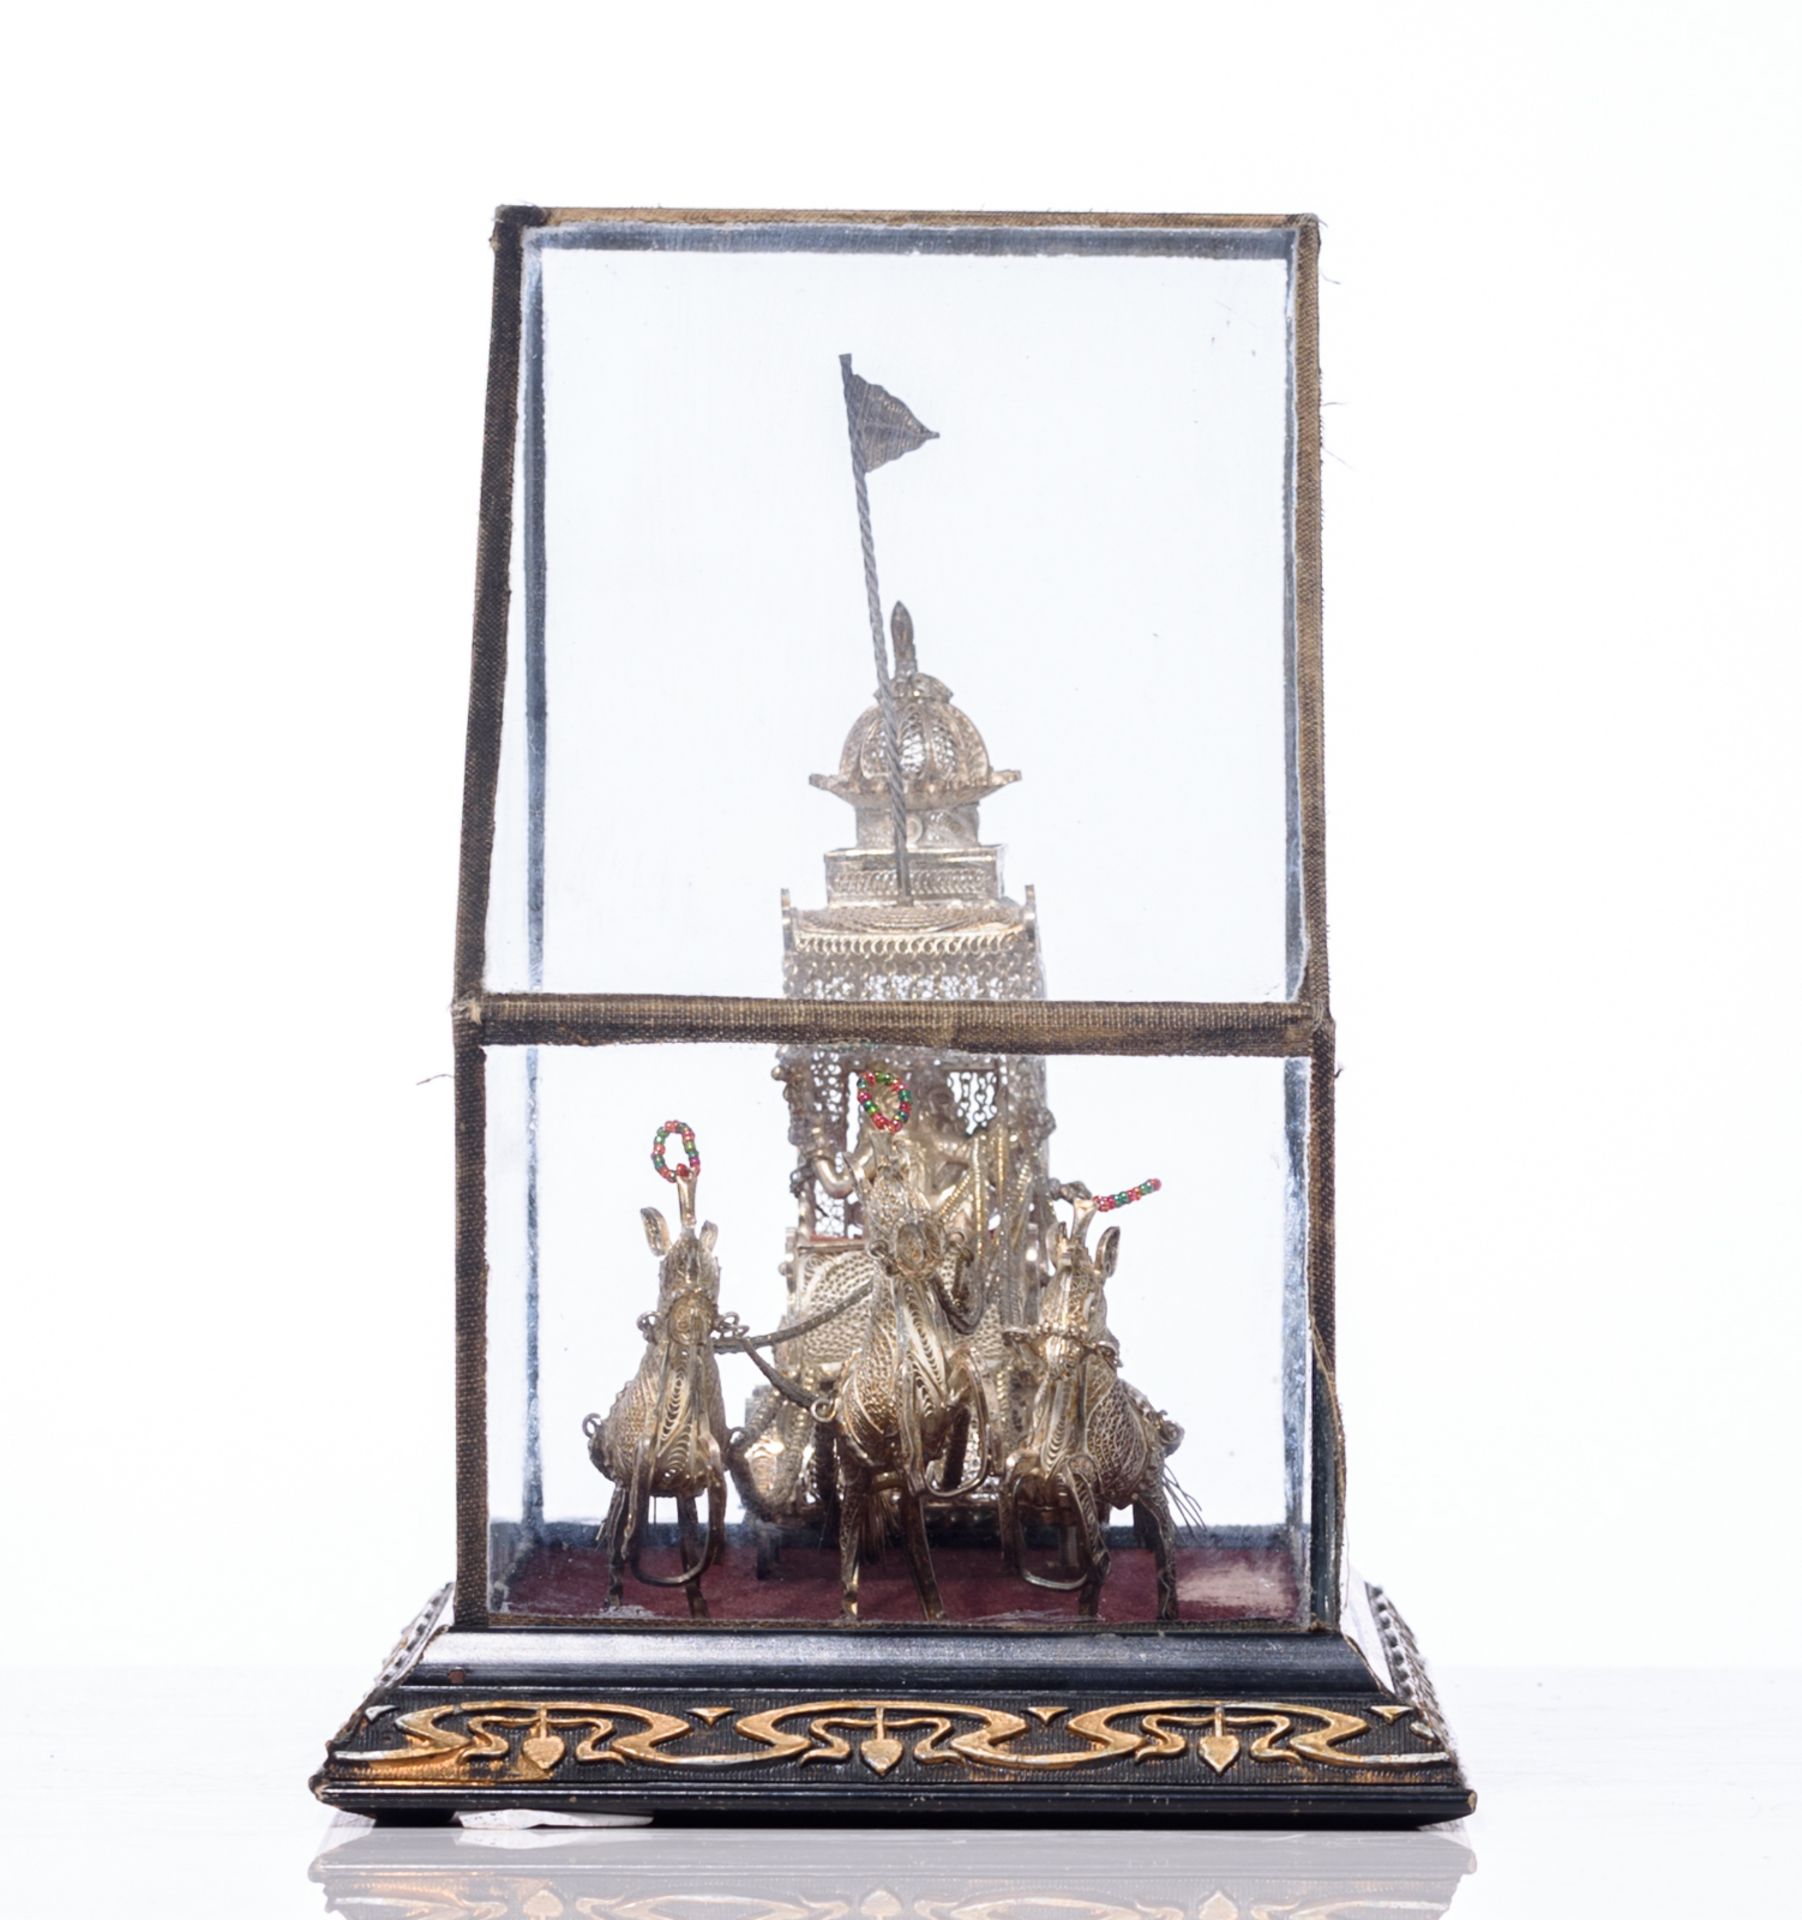 An Oriental silver filigree horse-drawn carriage, in a glass case with an Art Nouveau decorated base - Bild 5 aus 7